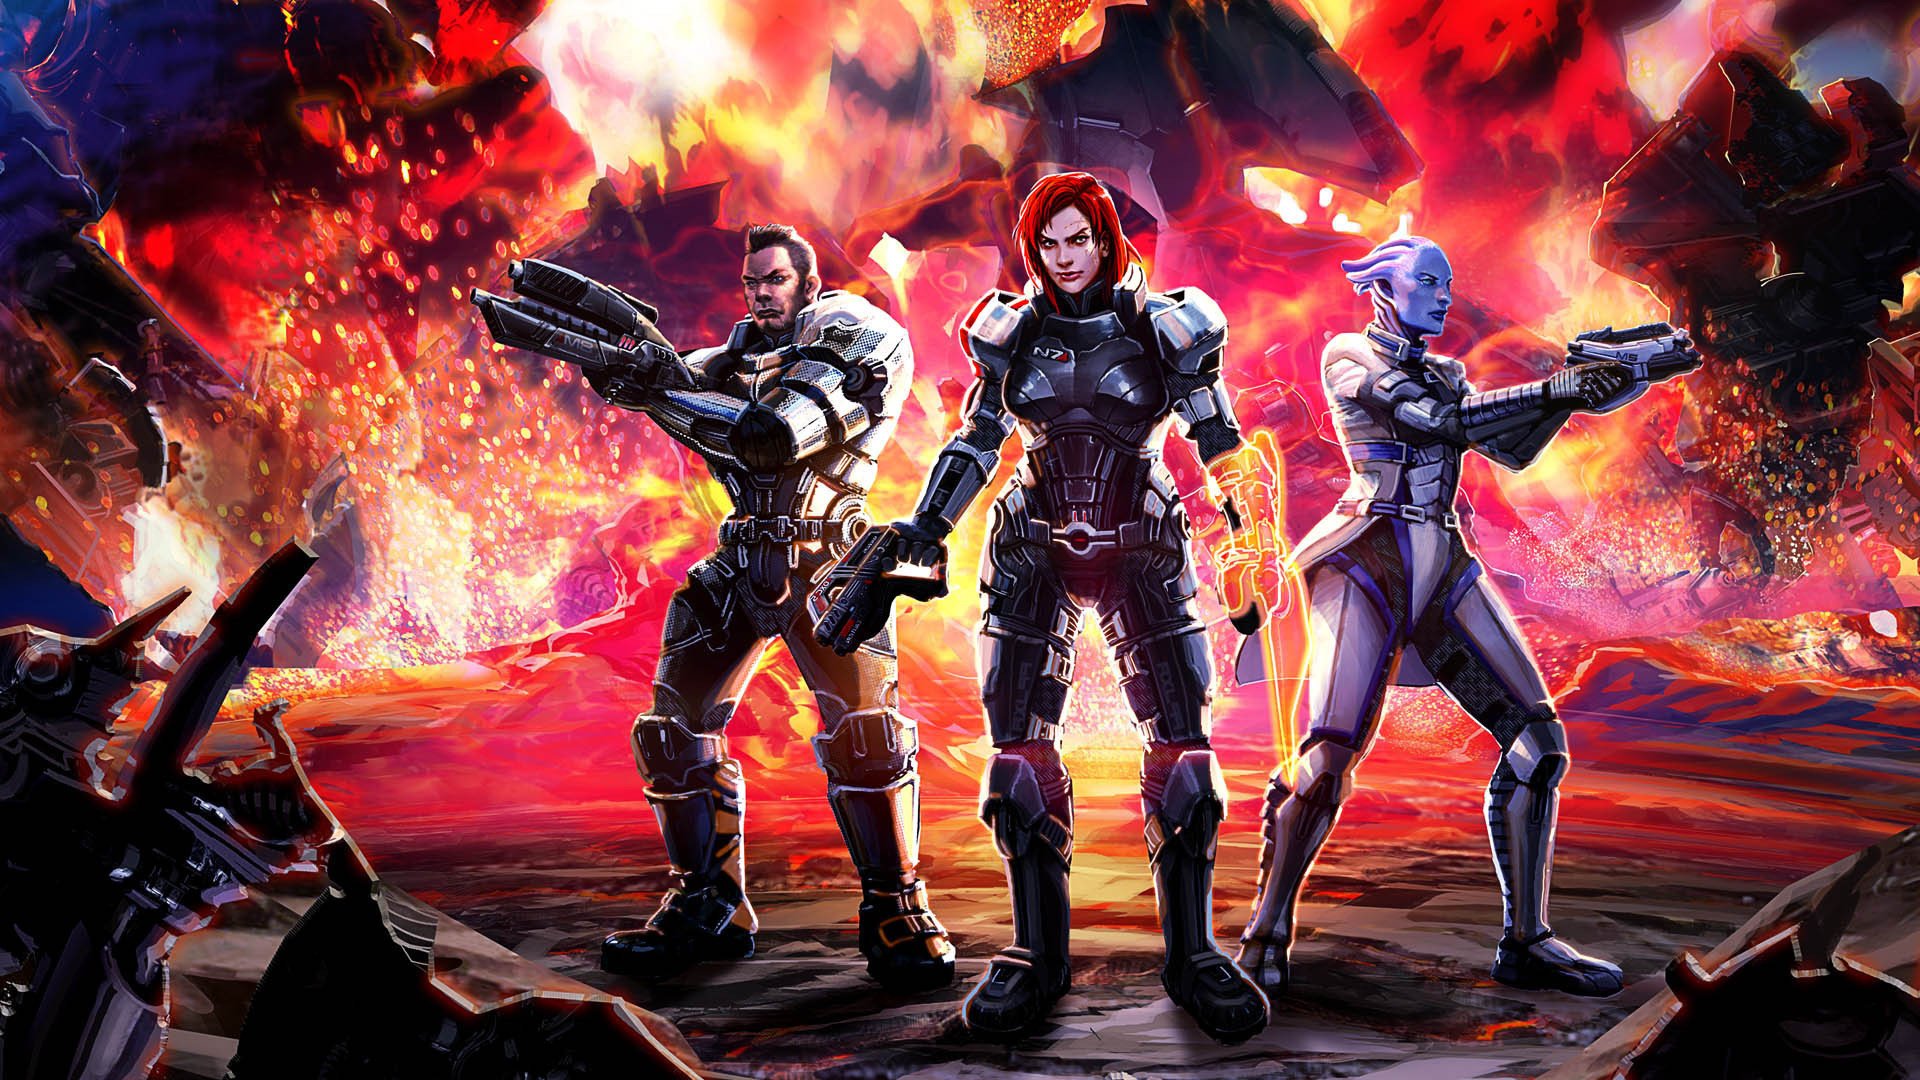 Mass Effect 3 Hd Wallpaper Background Image 1920x1080 Id Images, Photos, Reviews